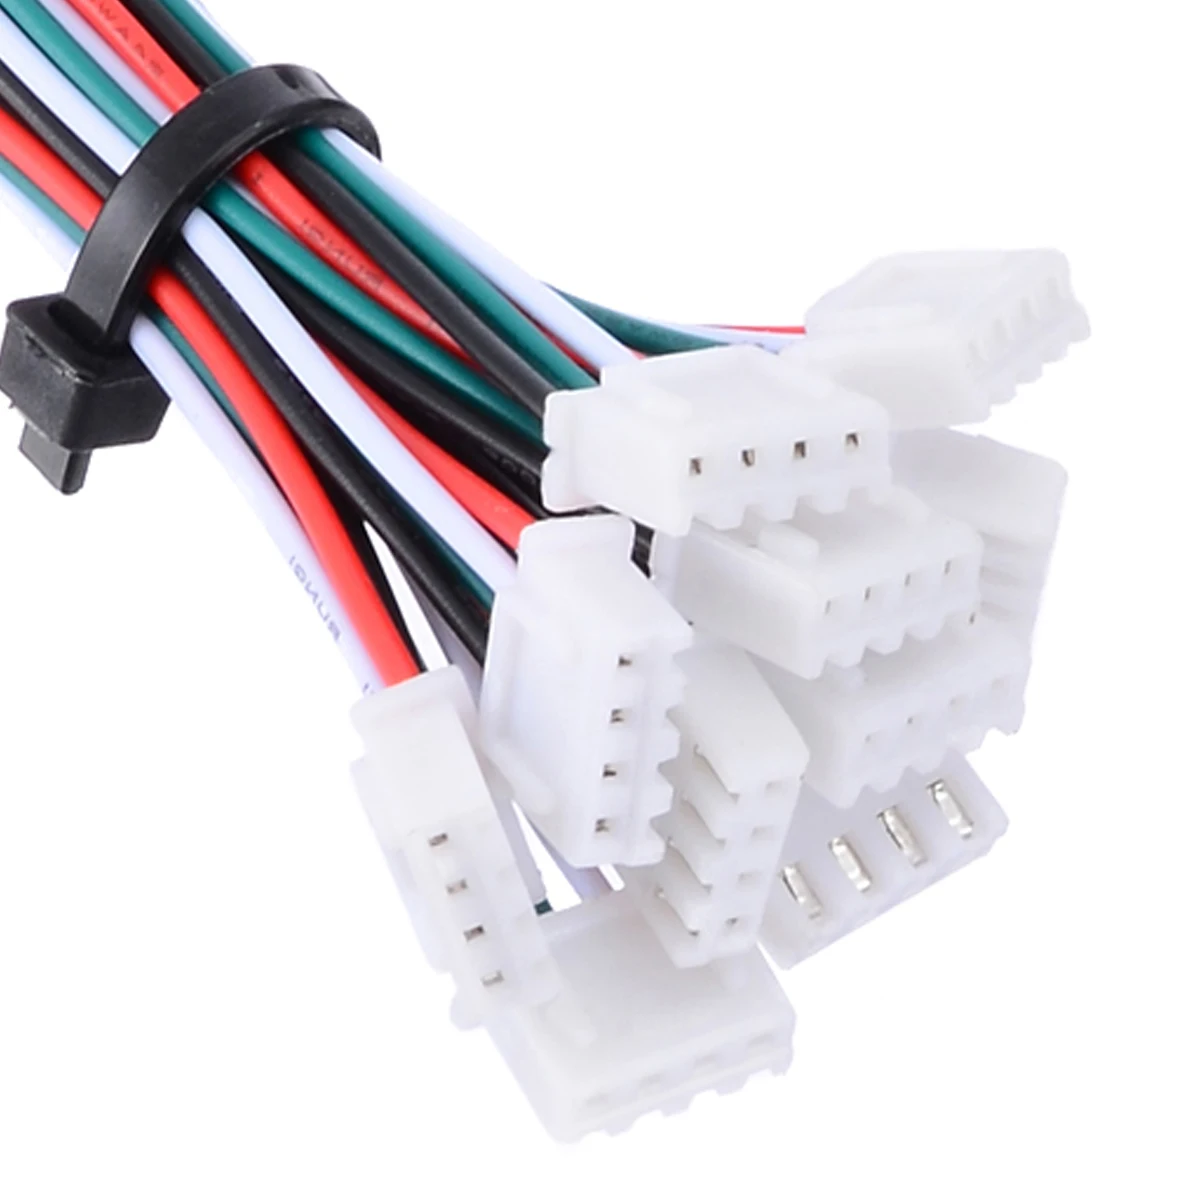 

10 Set Mini Micro JST XH 2.54mm 4 Pin Connector Plug With 24AWG 1007 Wires 150mm Length